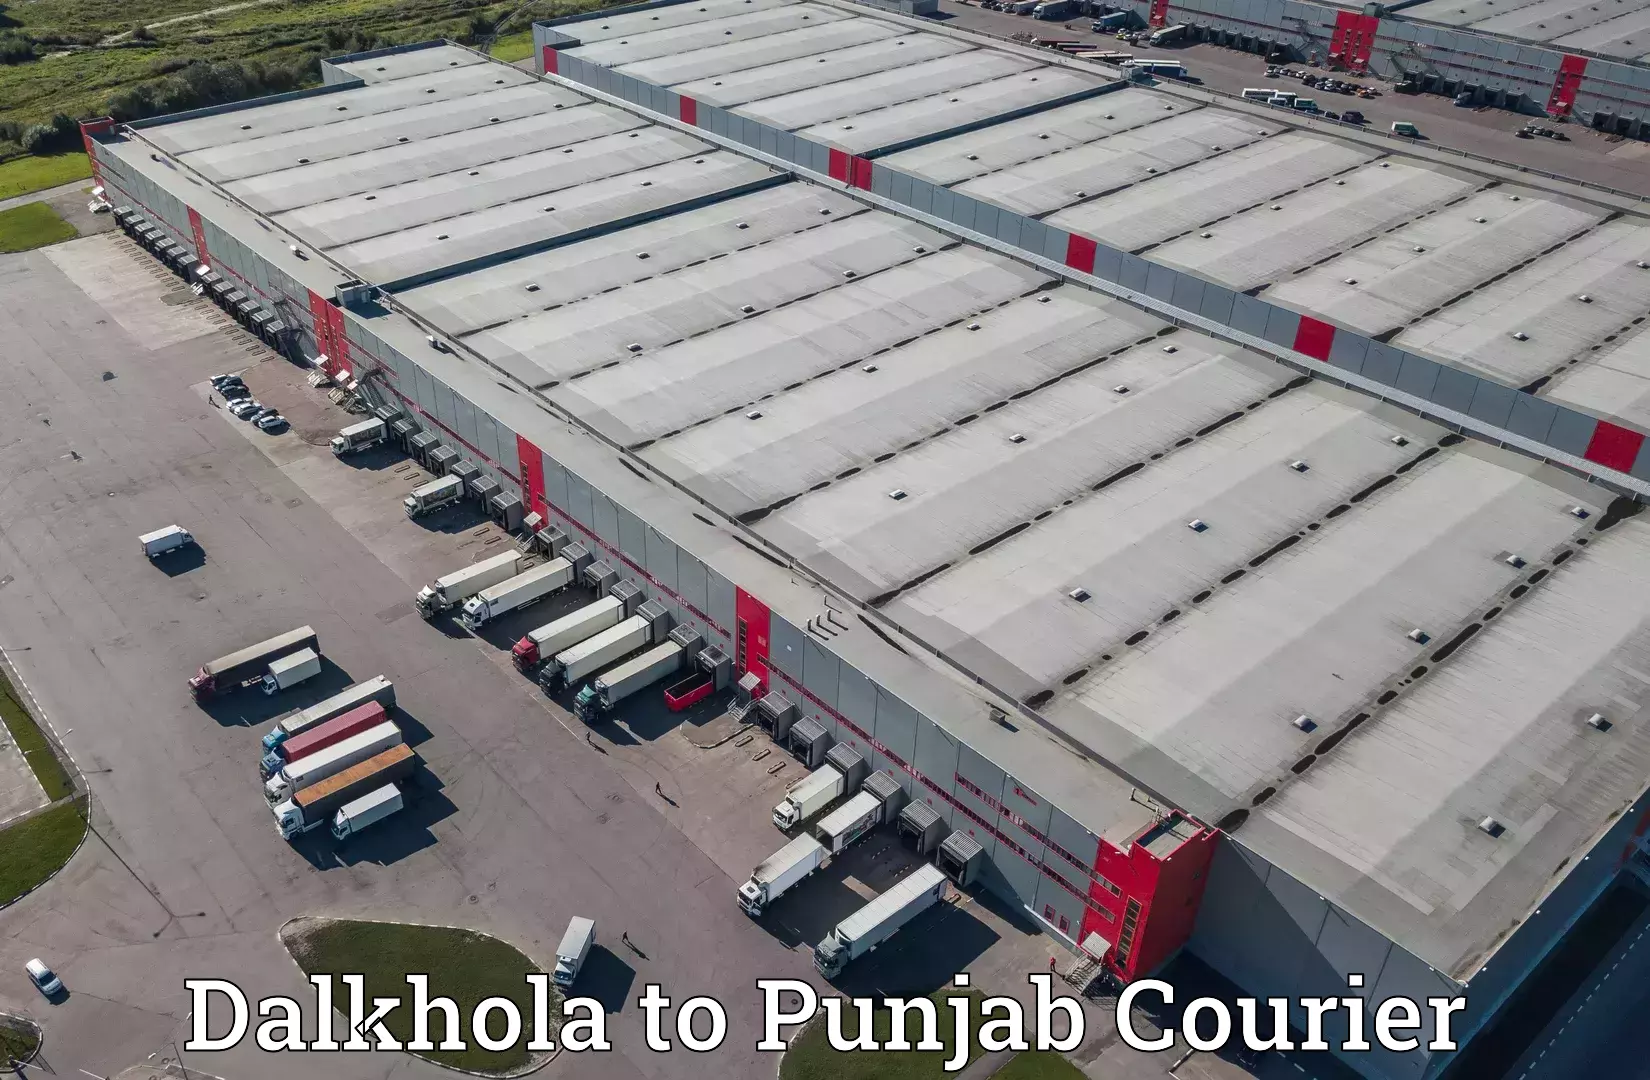 International courier networks Dalkhola to Patiala